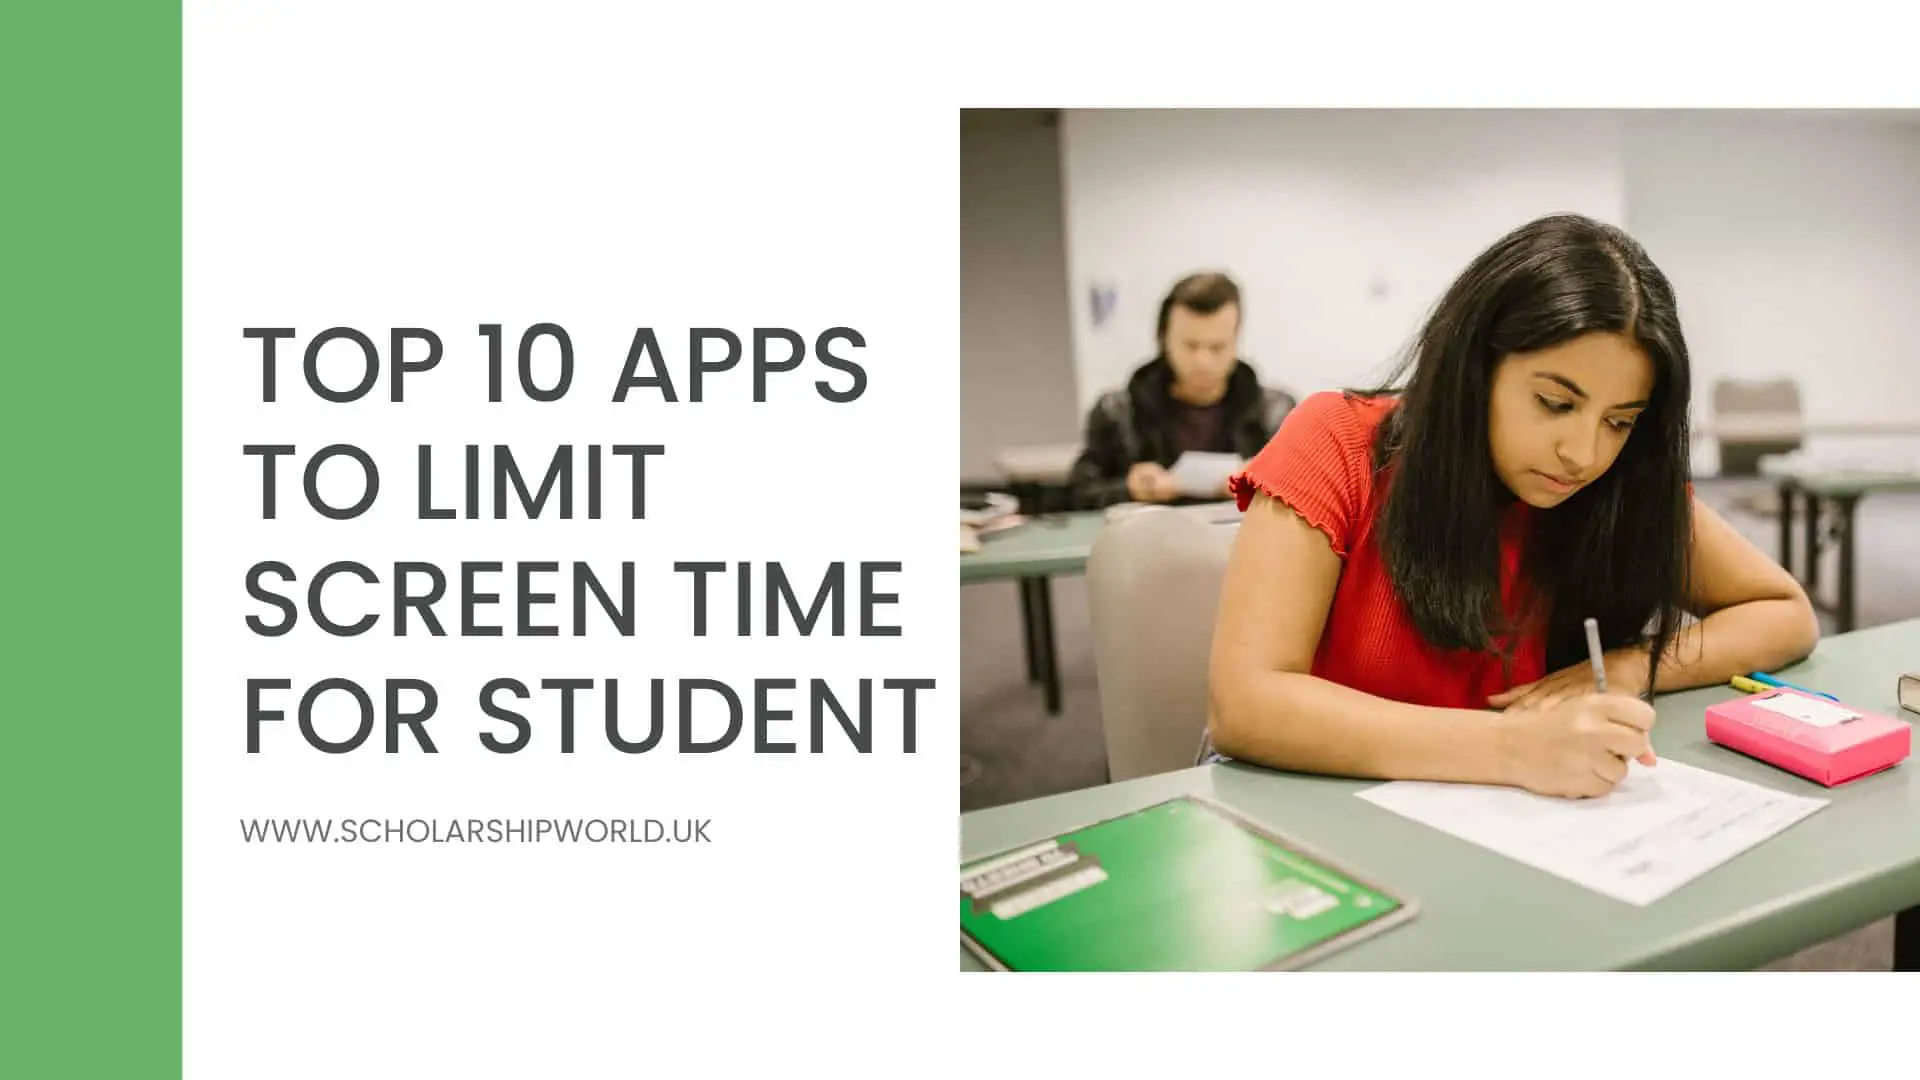 Top 10 Apps to Limit Screen Time for Student